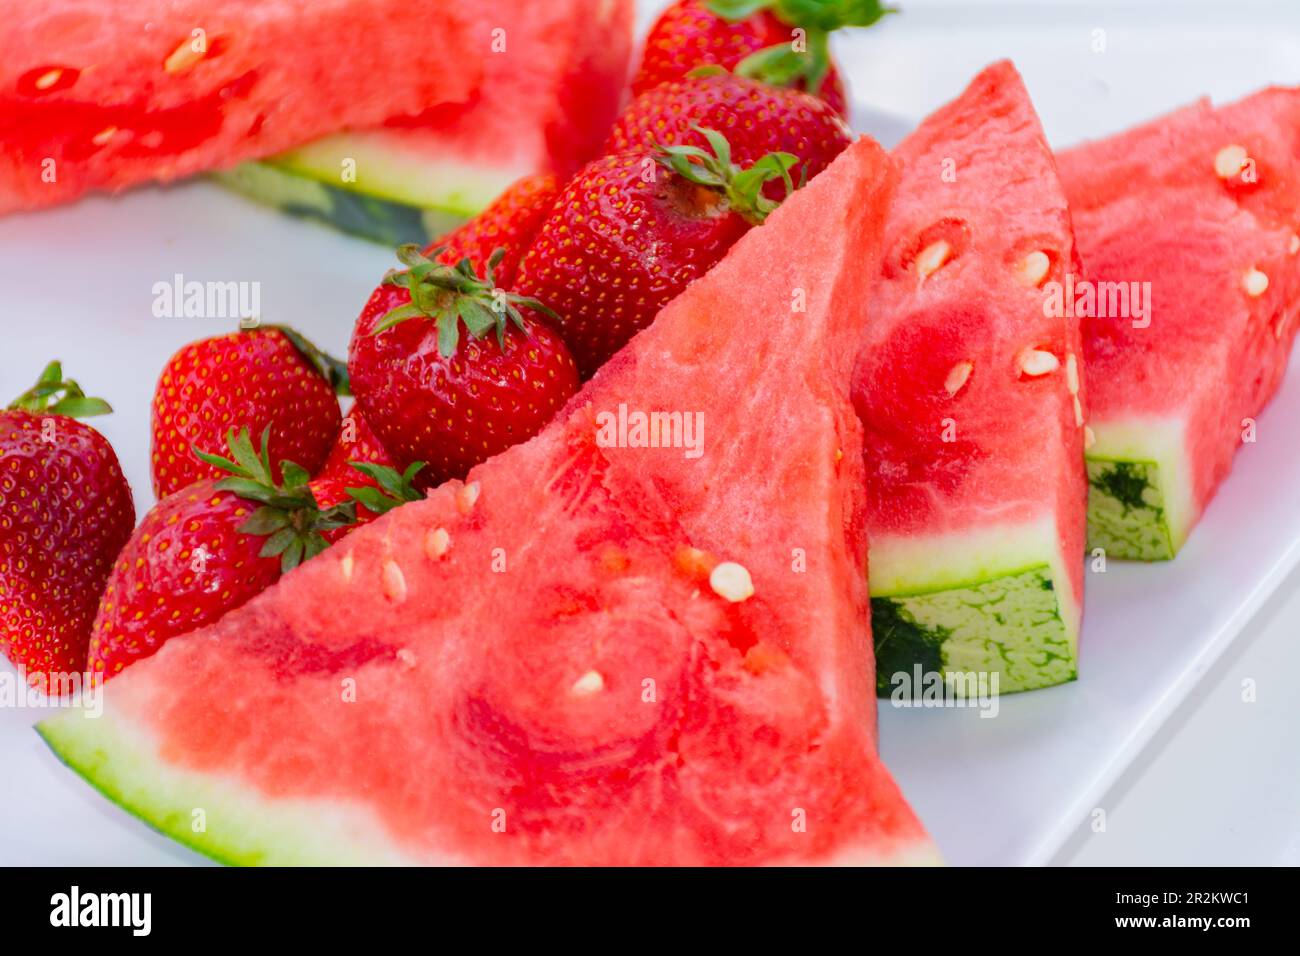 Watermelon slices along with several strawberries on a plate. Summer fruit, fresh and tasty Stock Photo